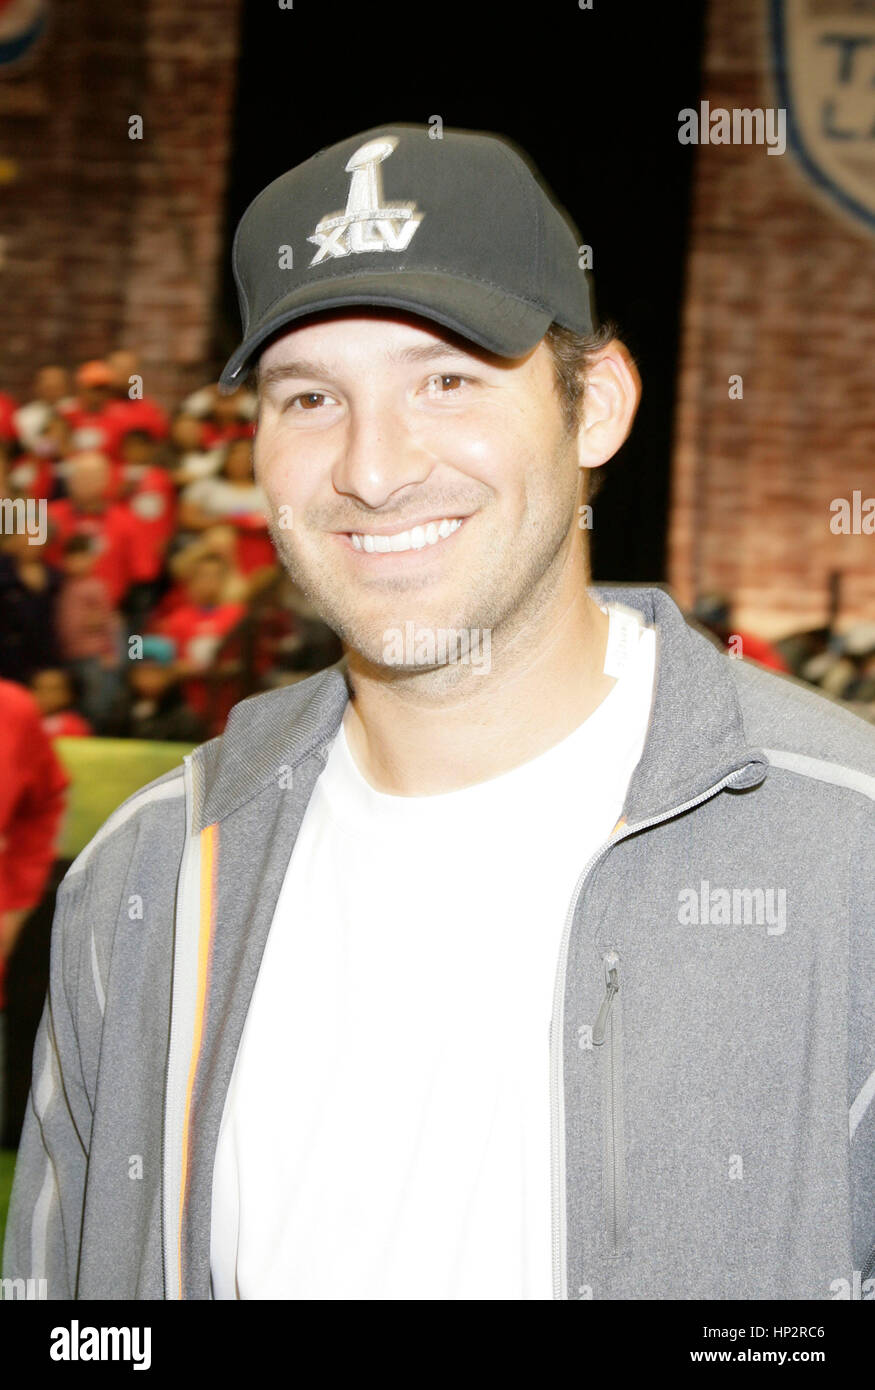 Dallas Cowboys quarterback Tony Romo at the Tazon Latino flag football game at Super Bowl NFL Experience at the Dallas Convention Center on February 2, 2011 in Dallas, Texas. Photo by Francis Specker Stock Photo